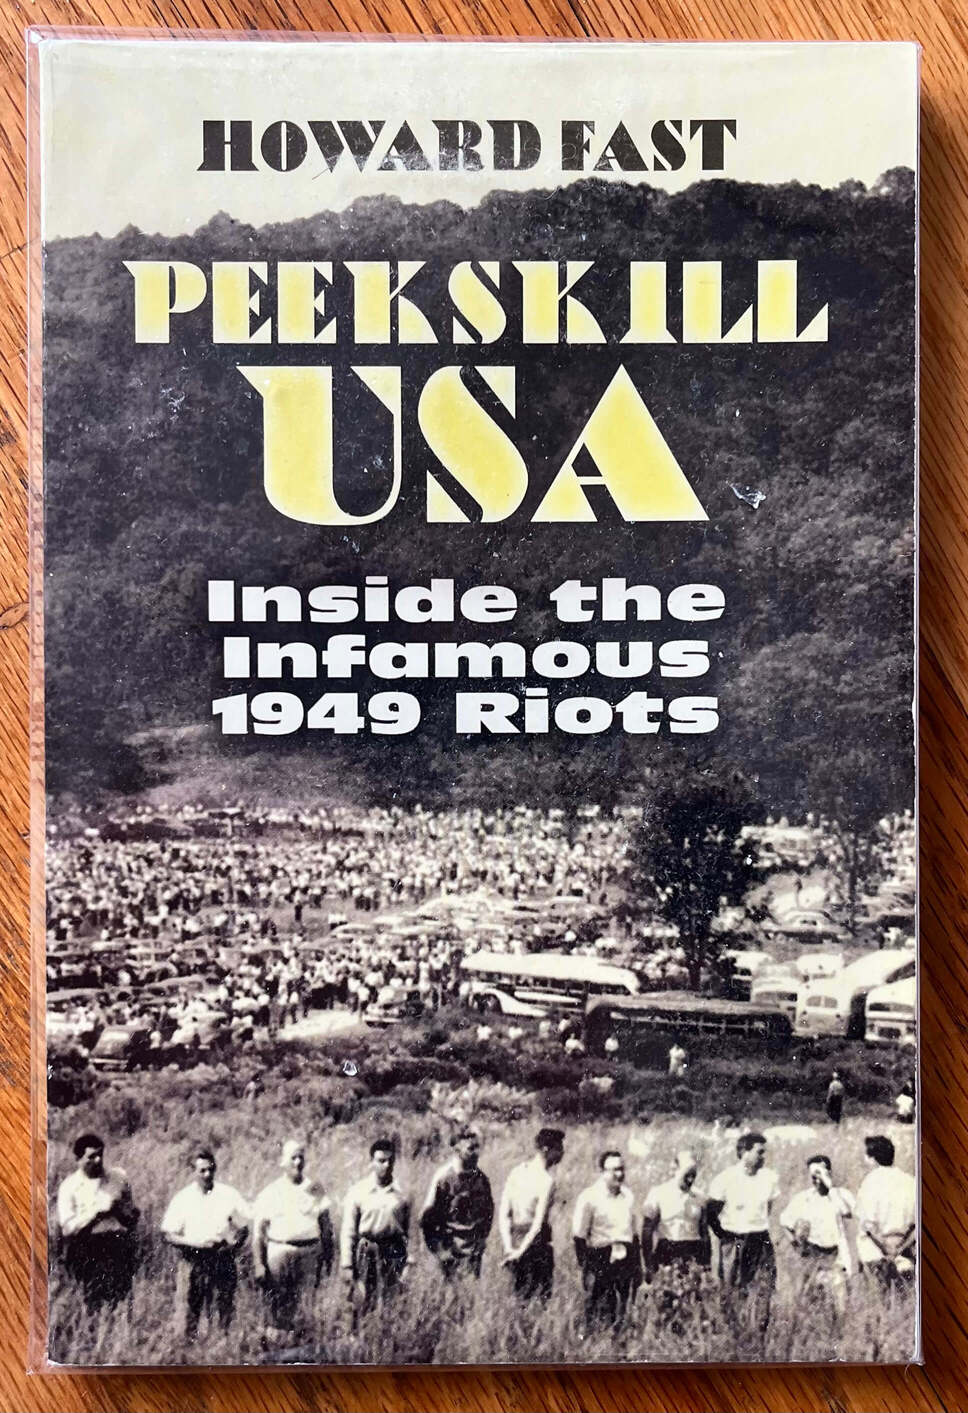 ”Peekskill USA: Inside the Infamous 1949 Riots“ by Howard Fast.